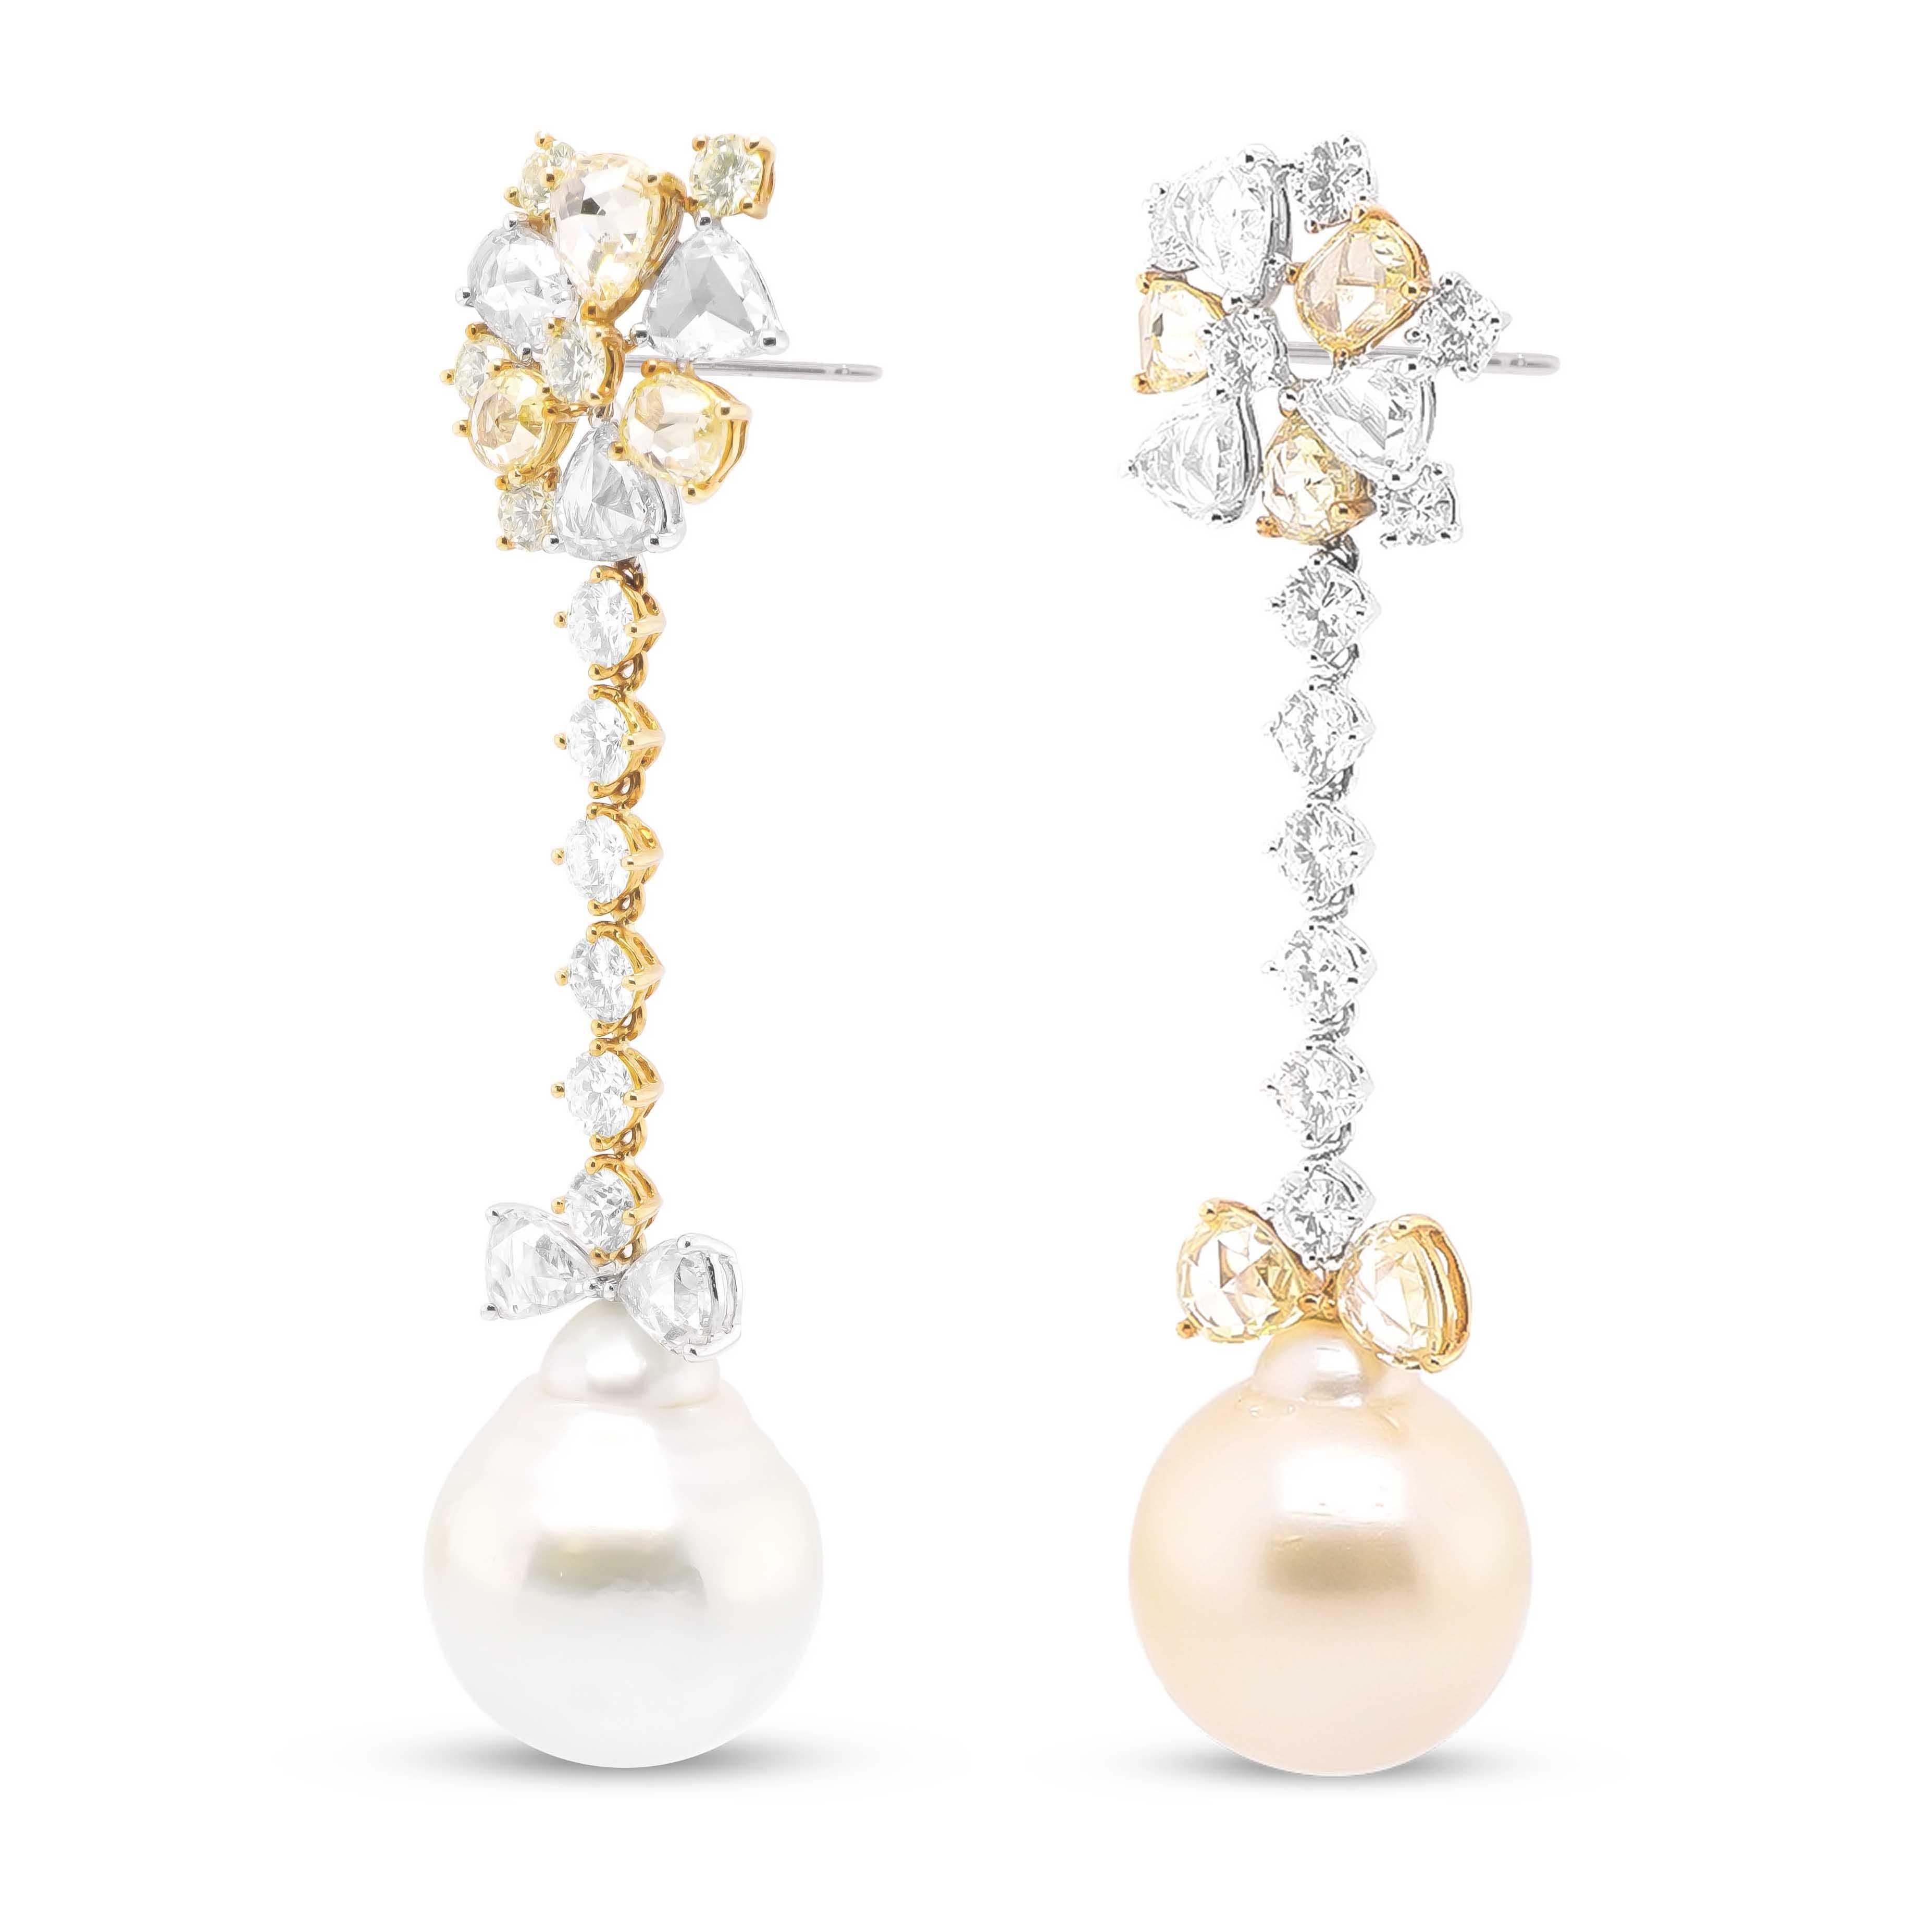 A pair of chandeliers dissimilar in color - one with a 25.55 carat white pearl suspended at the bottom, while the other has a 25.55 carat golden yellow pear suspended at the bottom.
Pearls are beauties formed in the bodies of Mollusk's in the ocean.